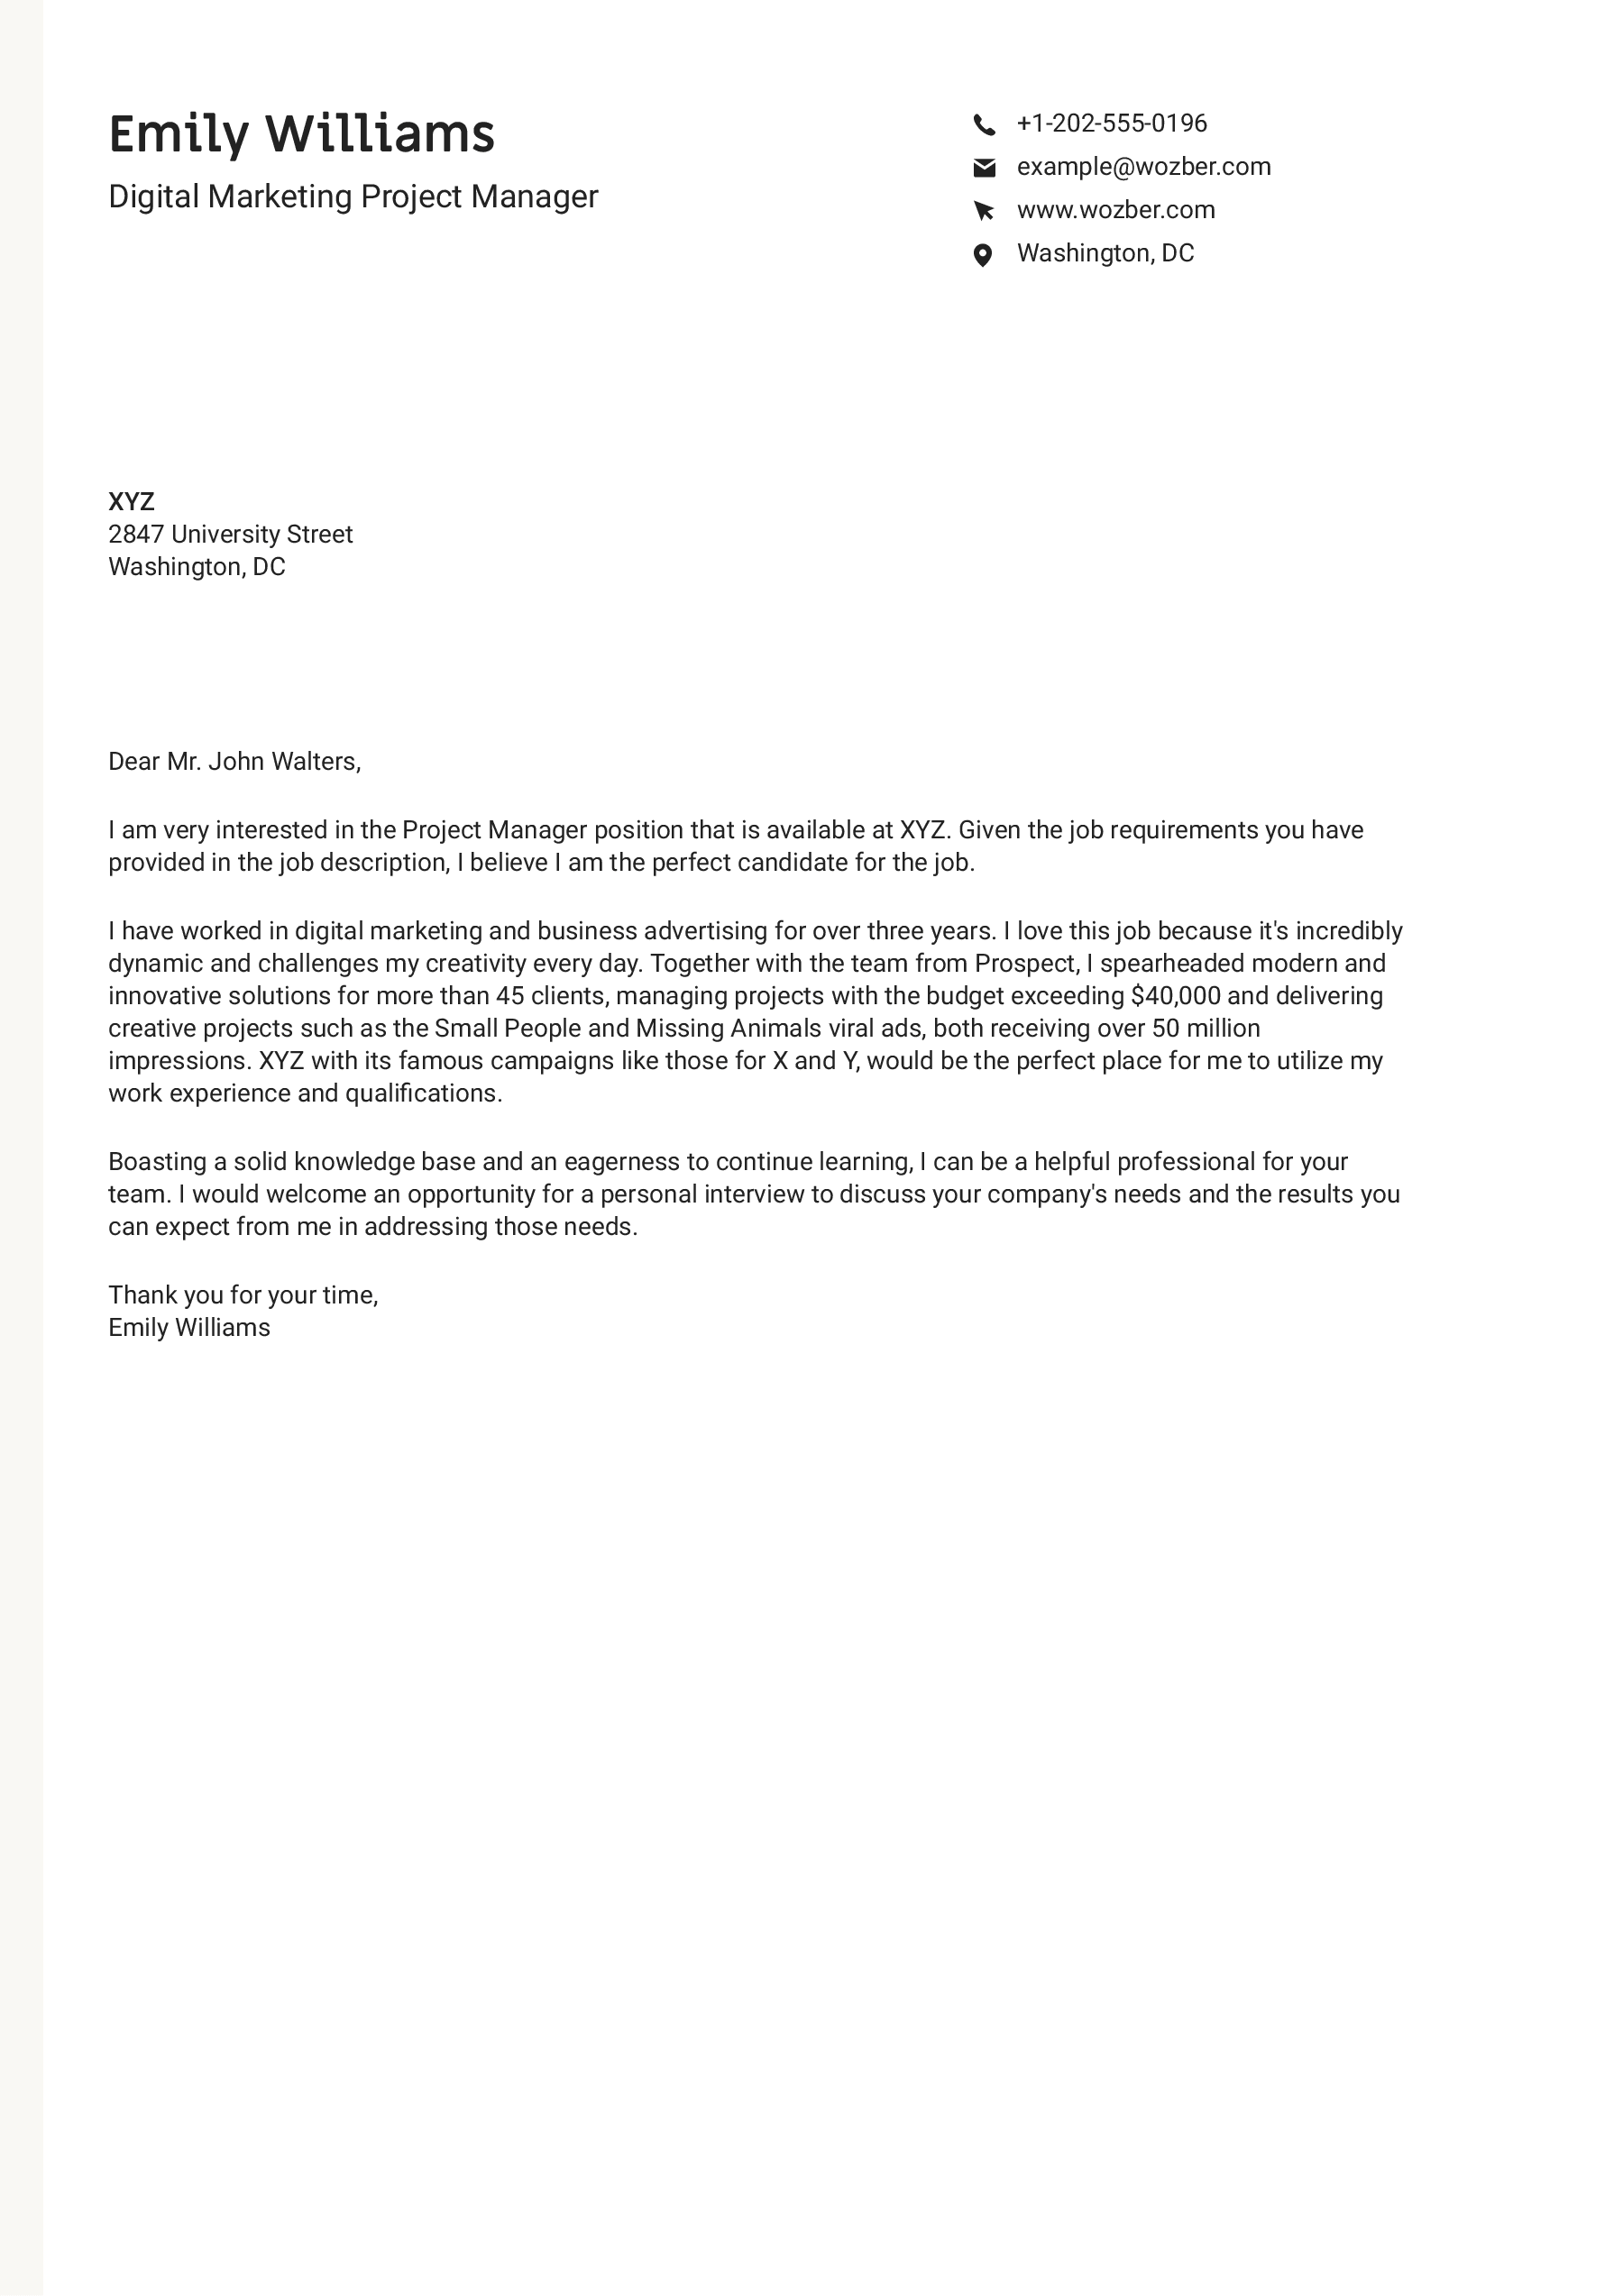 Digital marketing project manager cover letter example